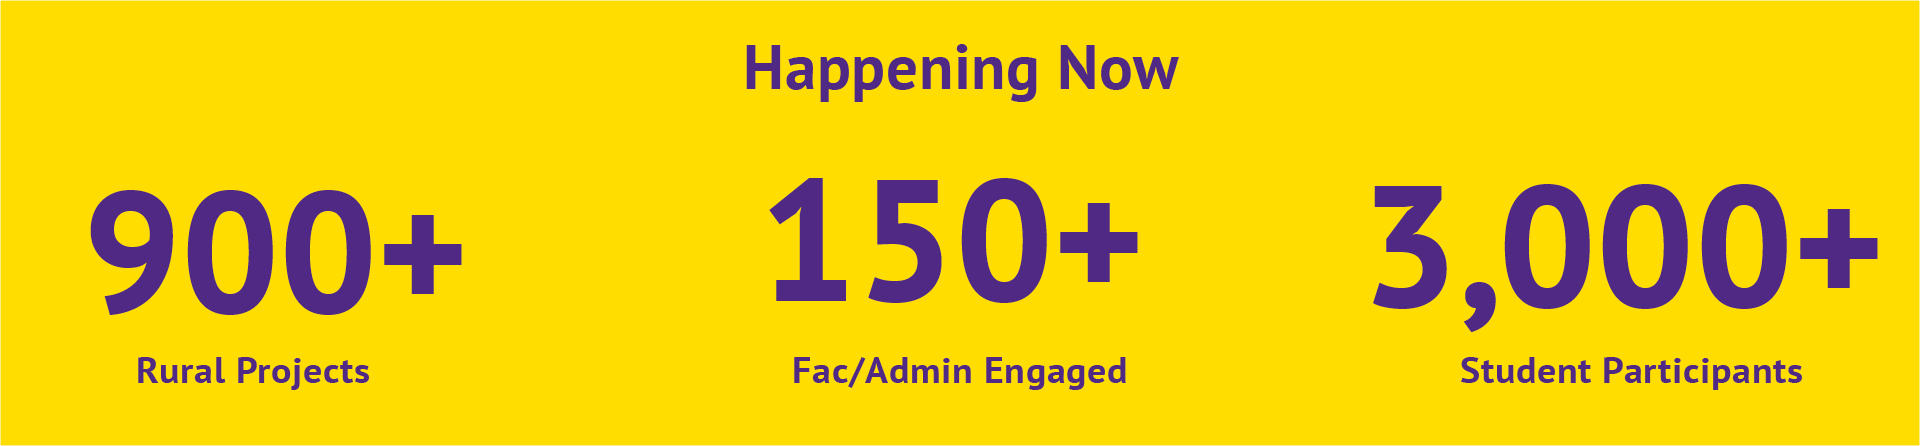 900+ Rural Projects, 150+ Fac/Admin Engaged and 3,000+ Student Participants